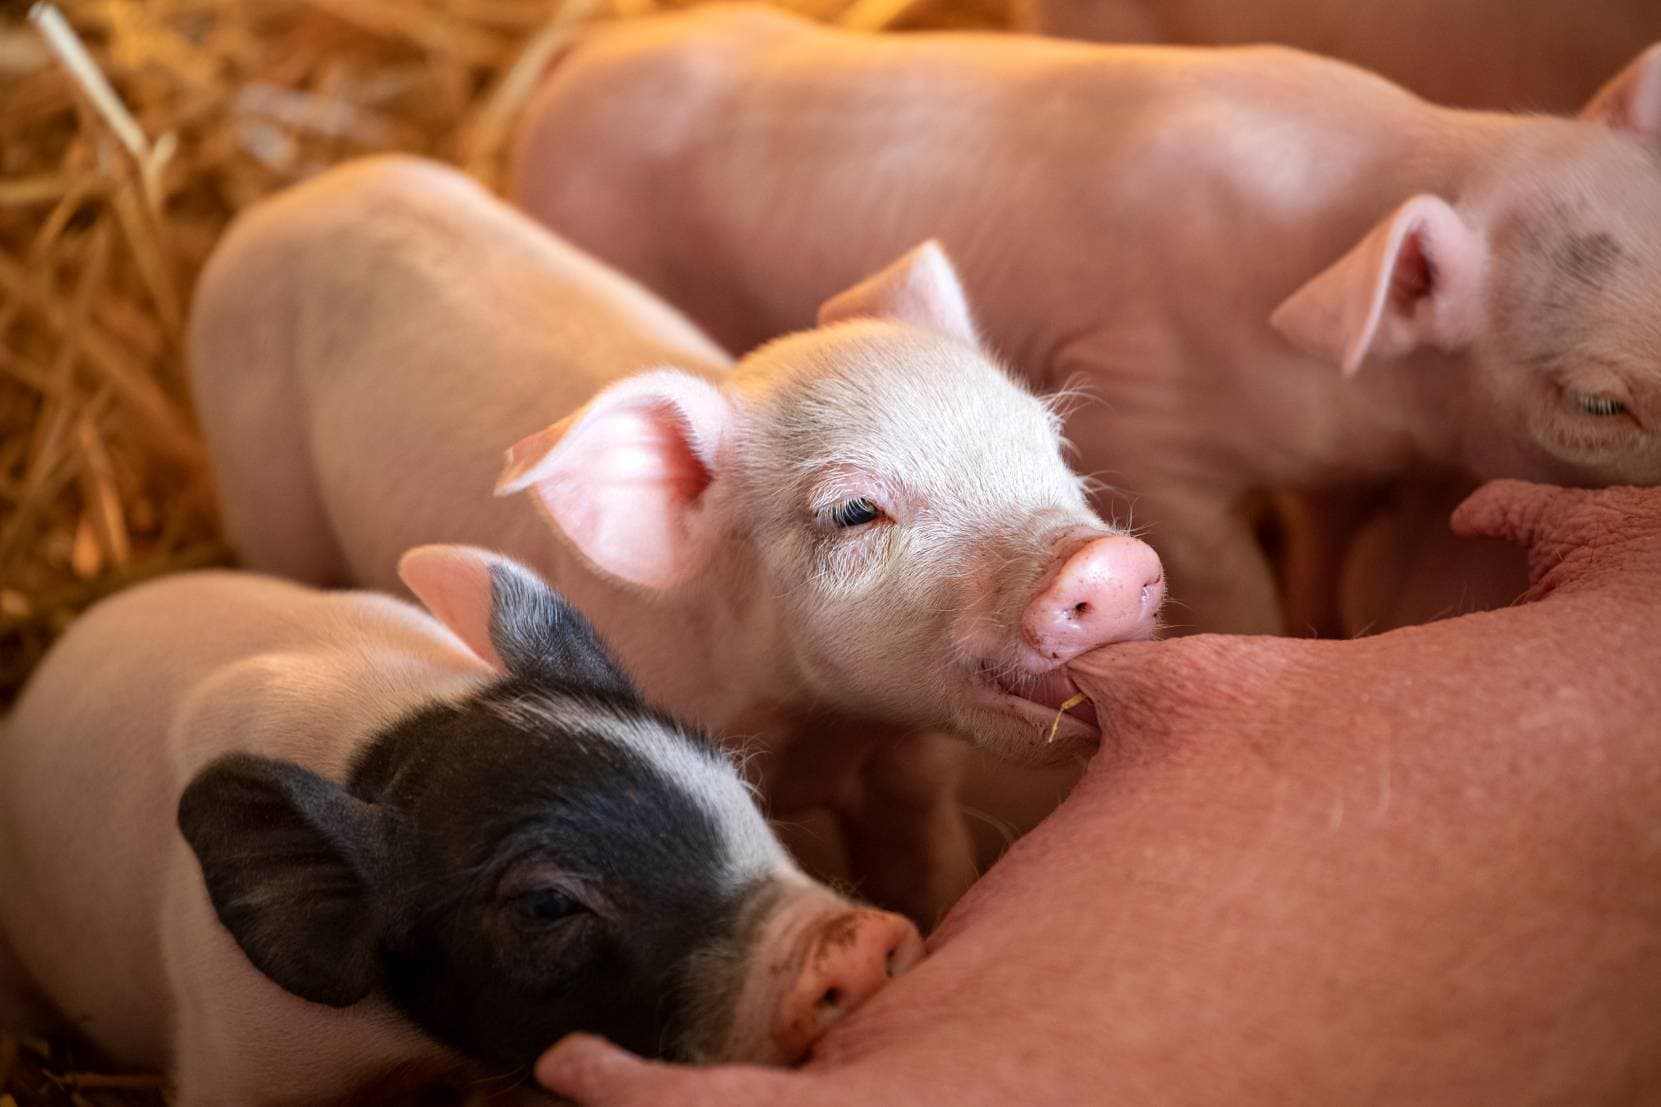 How many answers does litter of piglets (6) have?